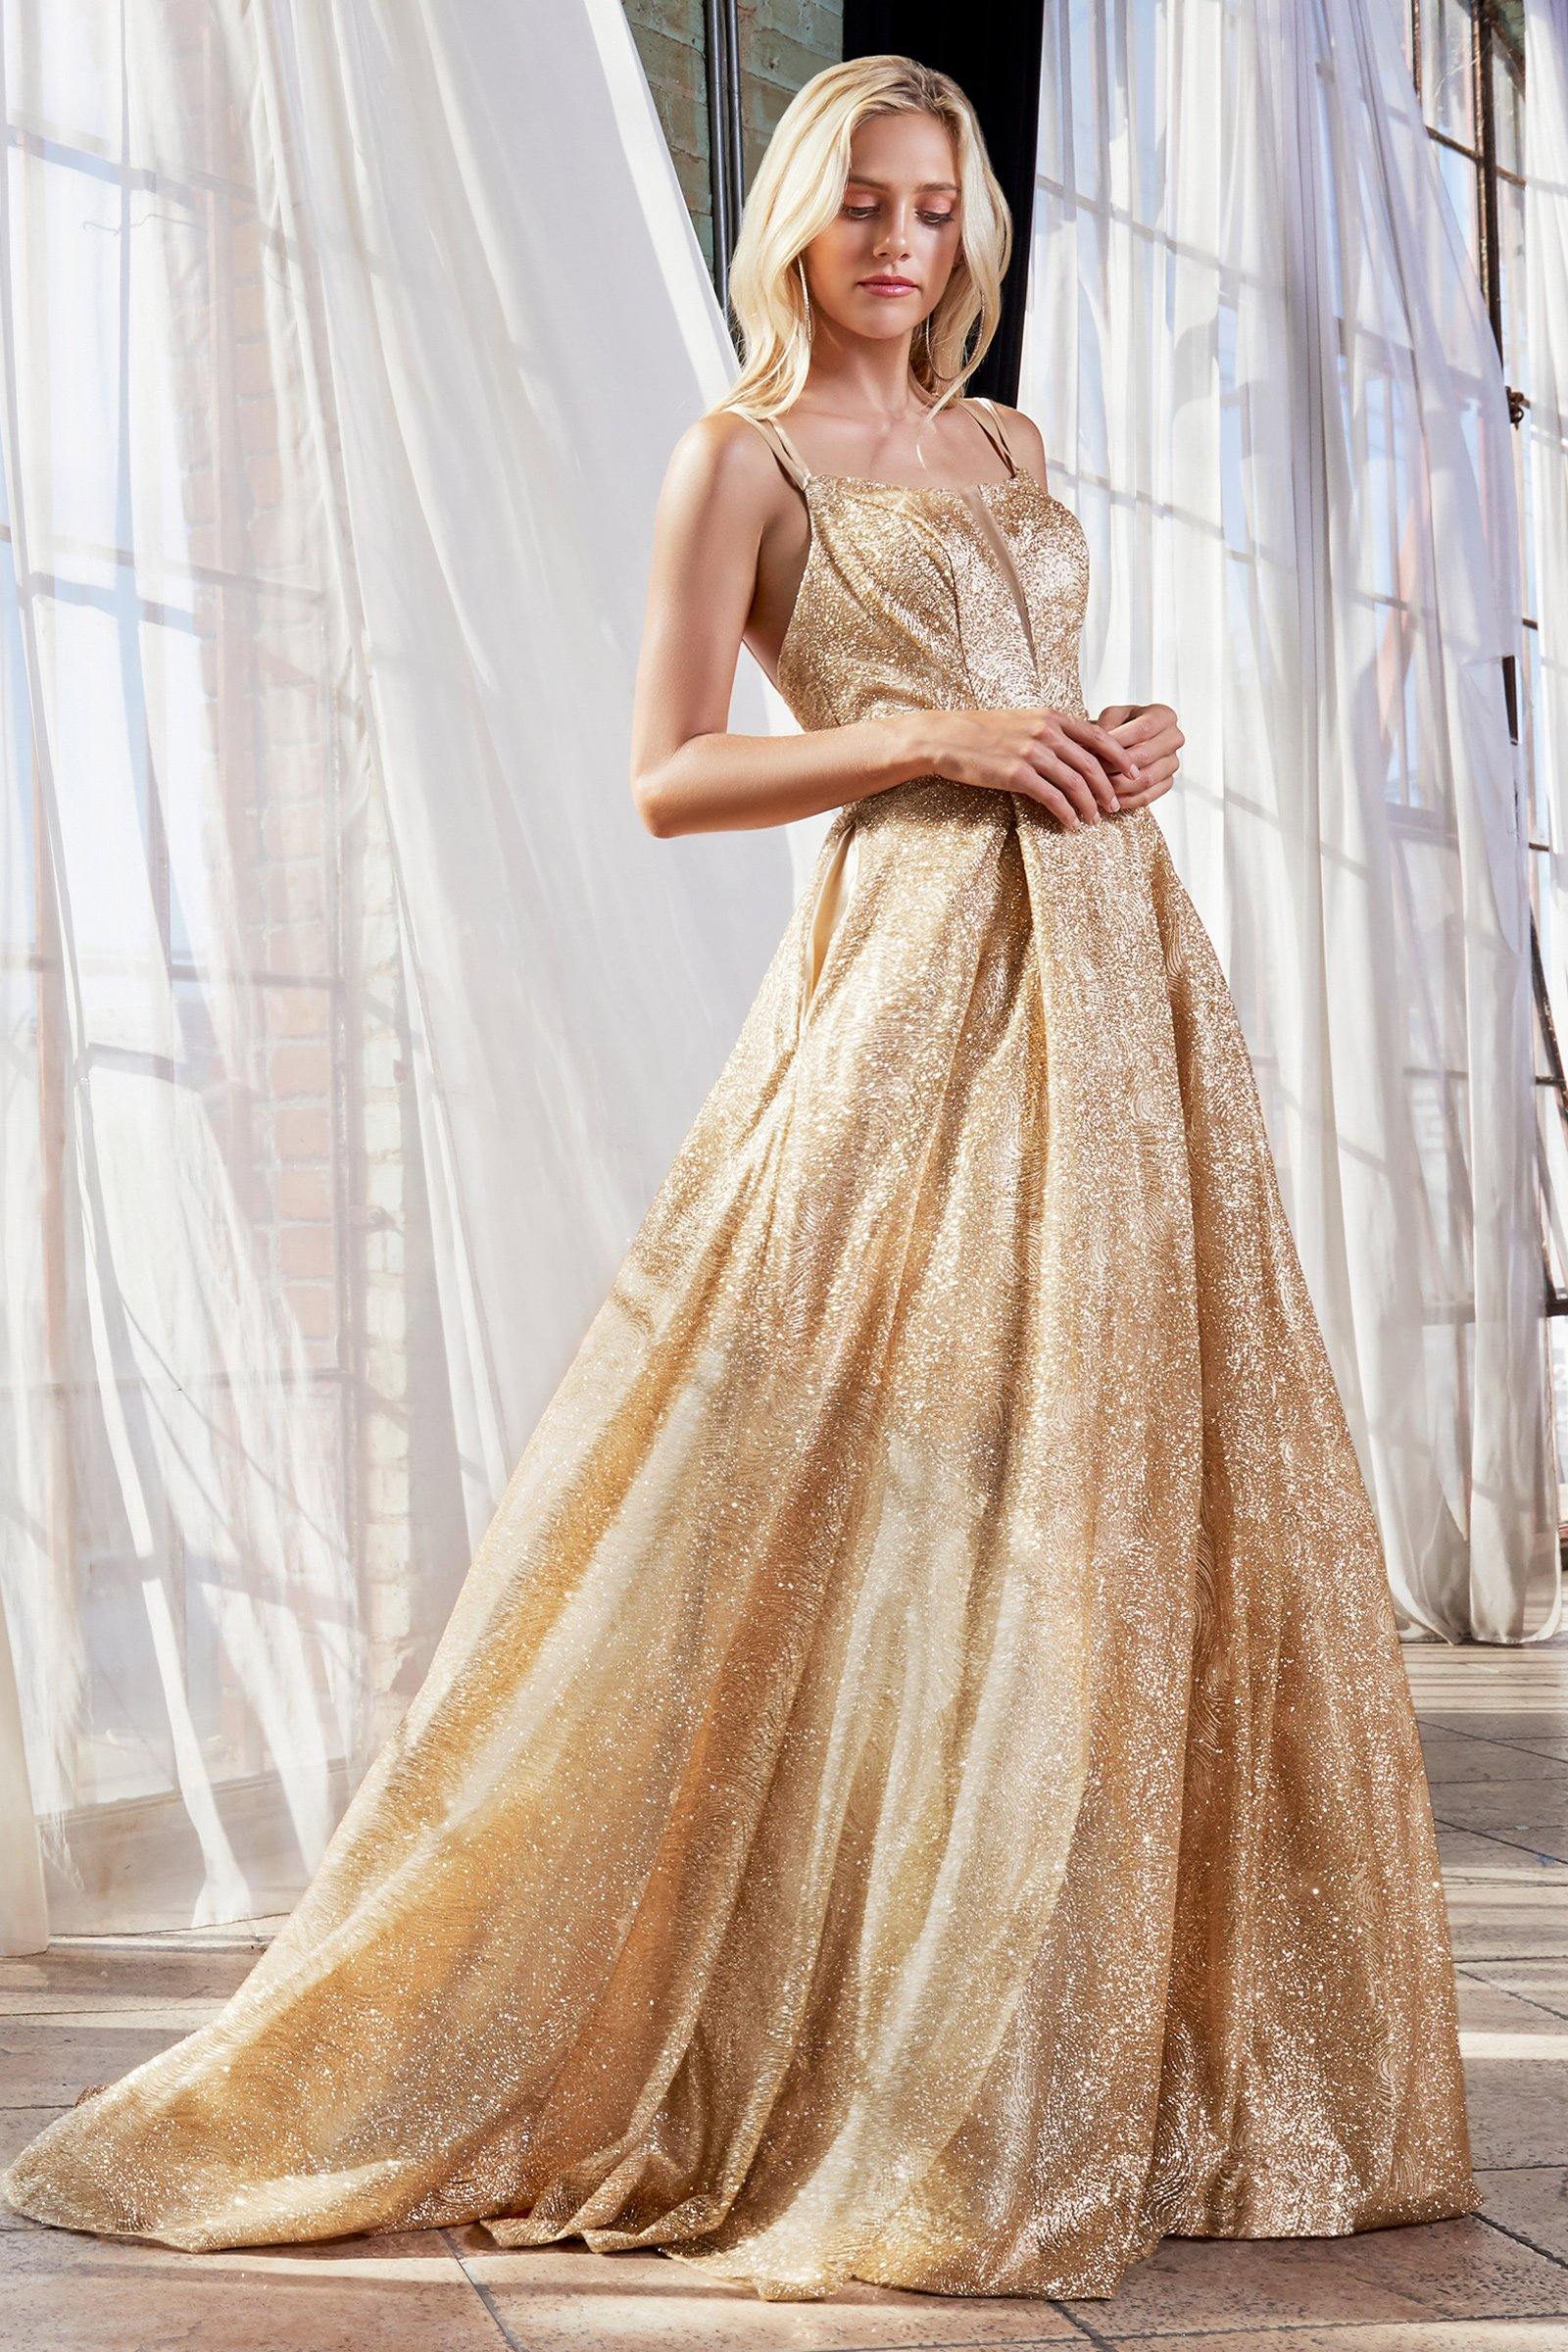 Simple gold lace bridesmaid dresses | New wedding dresses, Beautiful dresses,  Wedding dresses